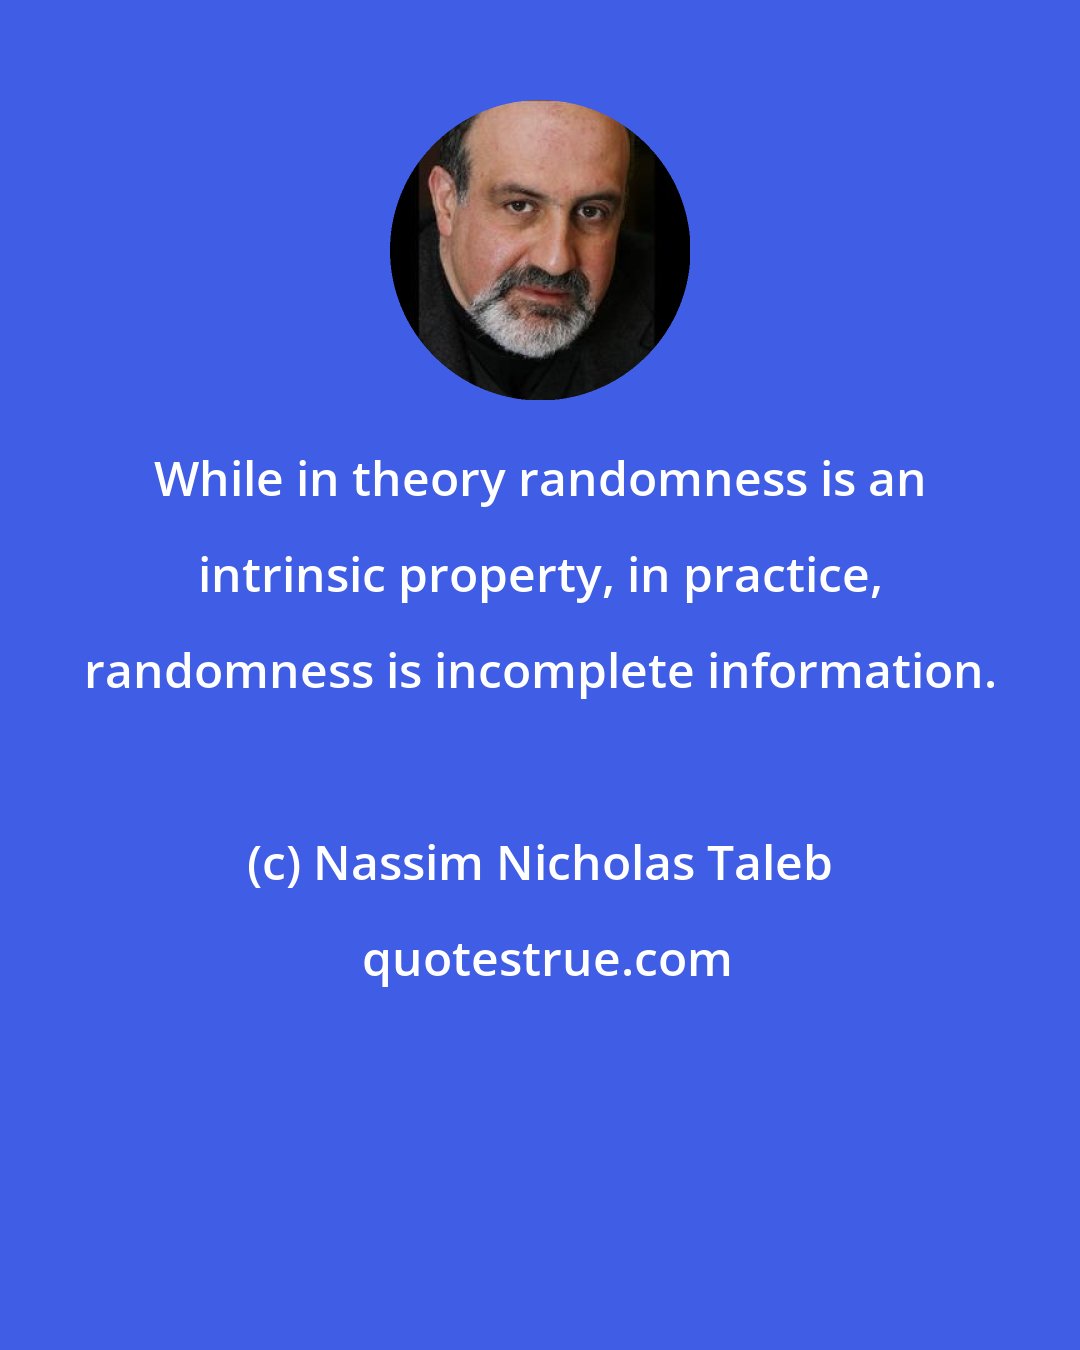 Nassim Nicholas Taleb: While in theory randomness is an intrinsic property, in practice, randomness is incomplete information.